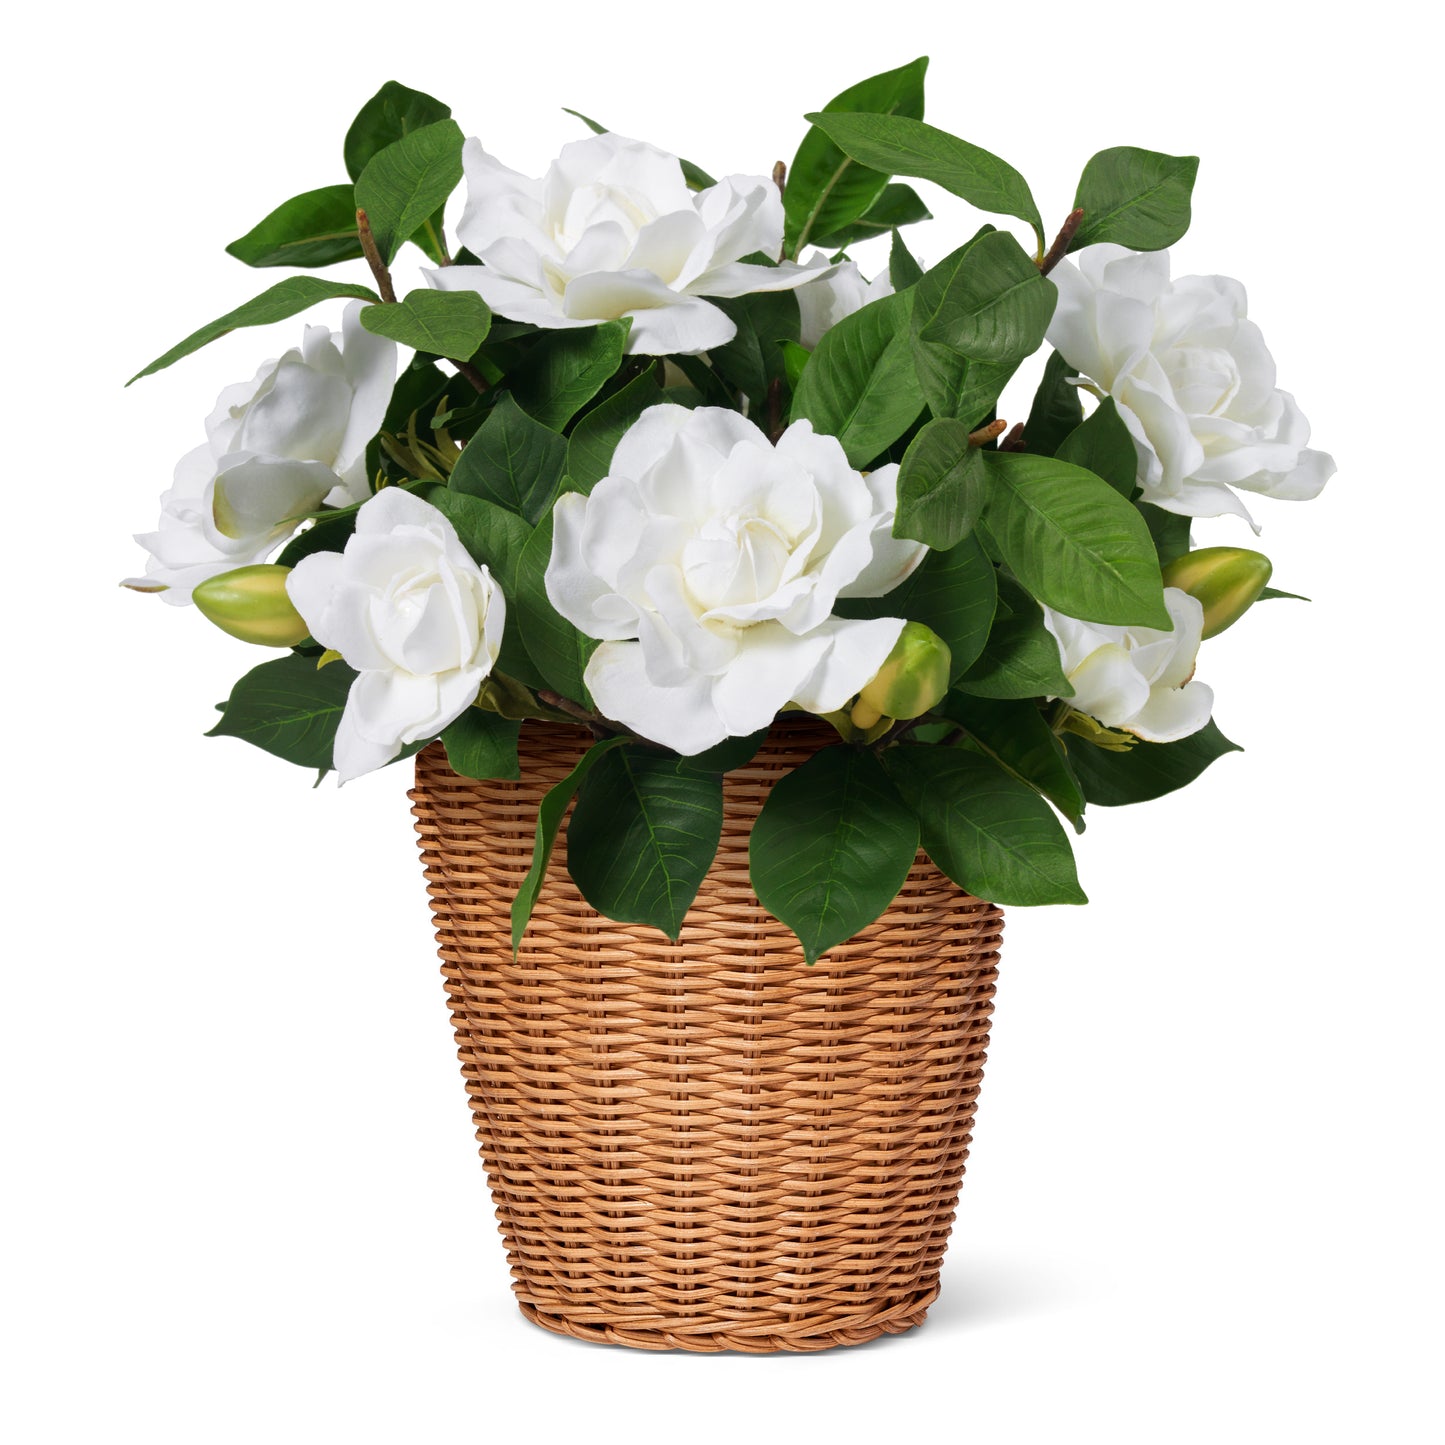 White Gardenia in Freya Vase, Toffee- Diane James Home | Faux Floral Couture Handmade In The USA